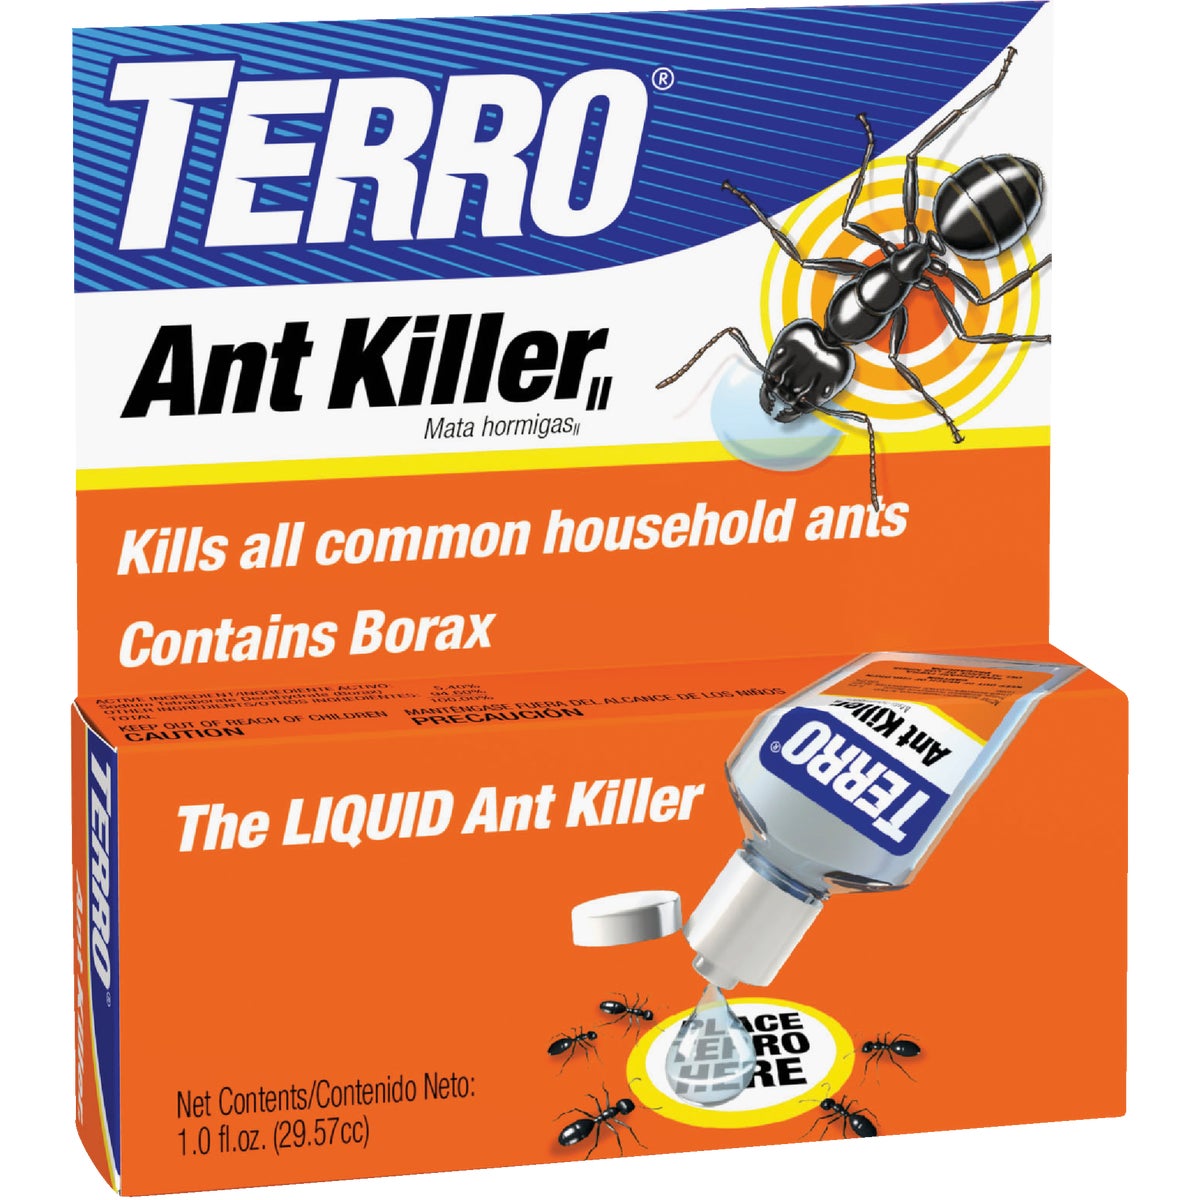 Item 700029, Attracts and kills all common household ants.